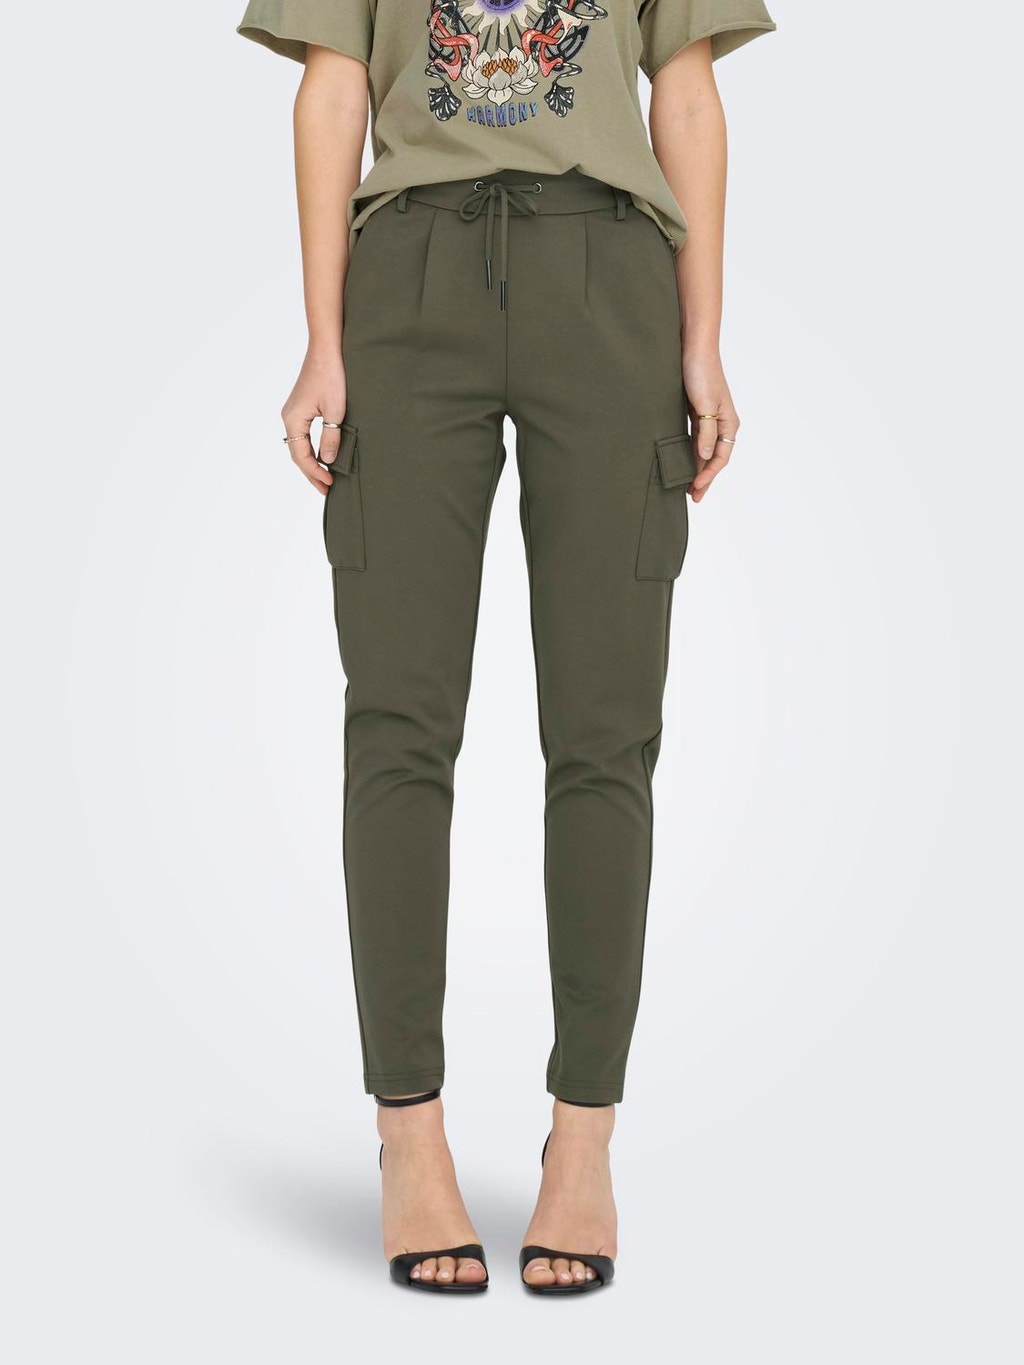 Poptrash pocket Cargo trousers 40% discount! | ONLY®